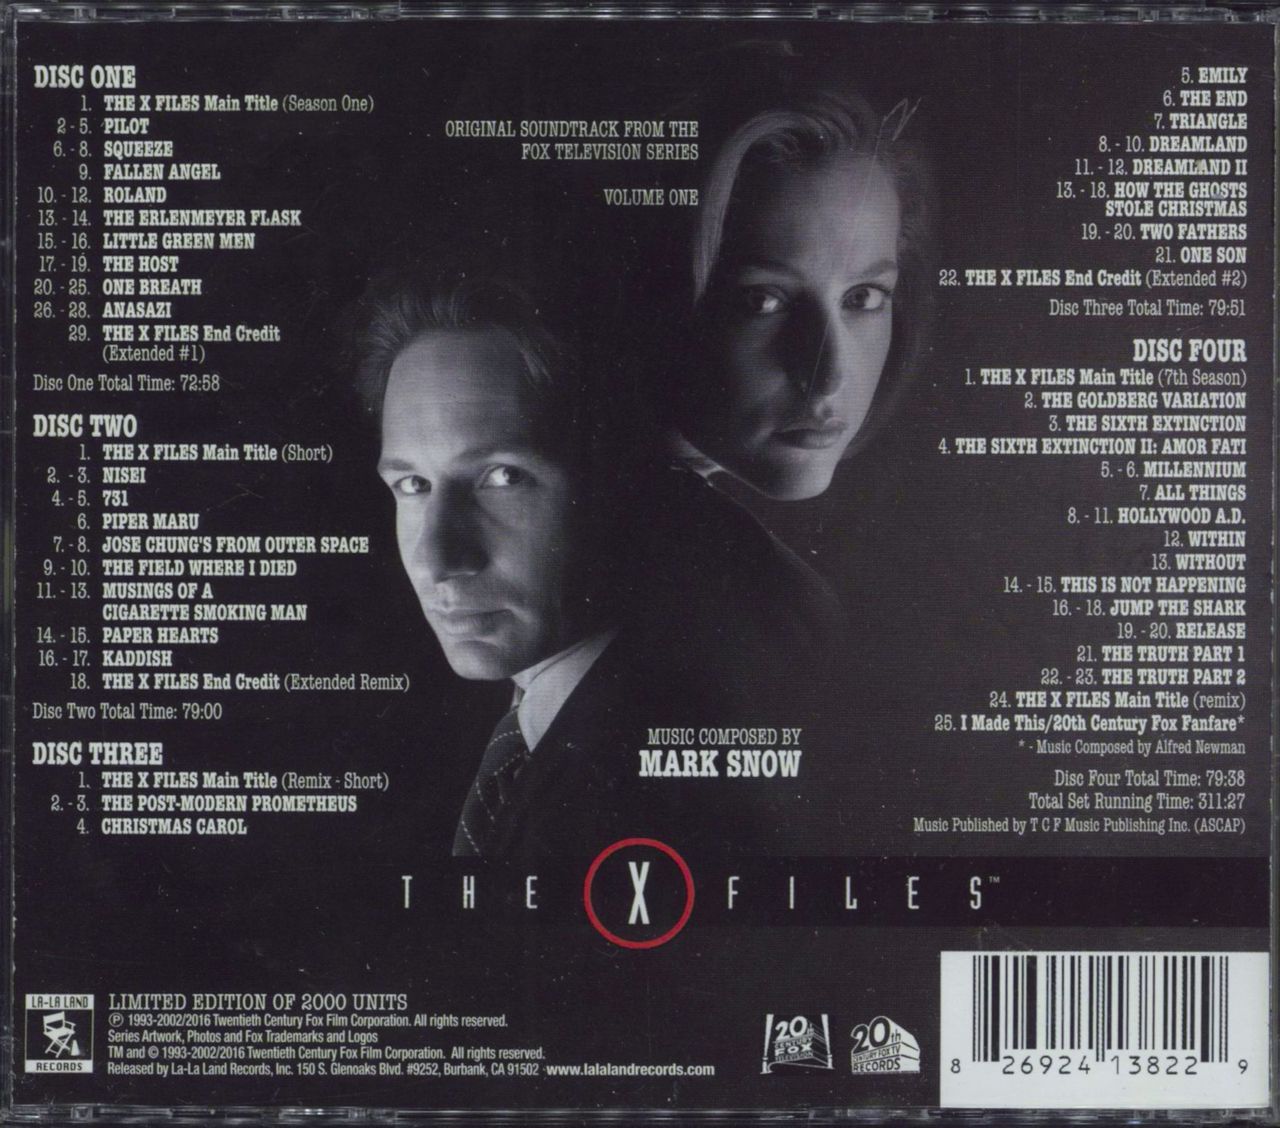 THE X-FILES VOLUME ONE 4CD-